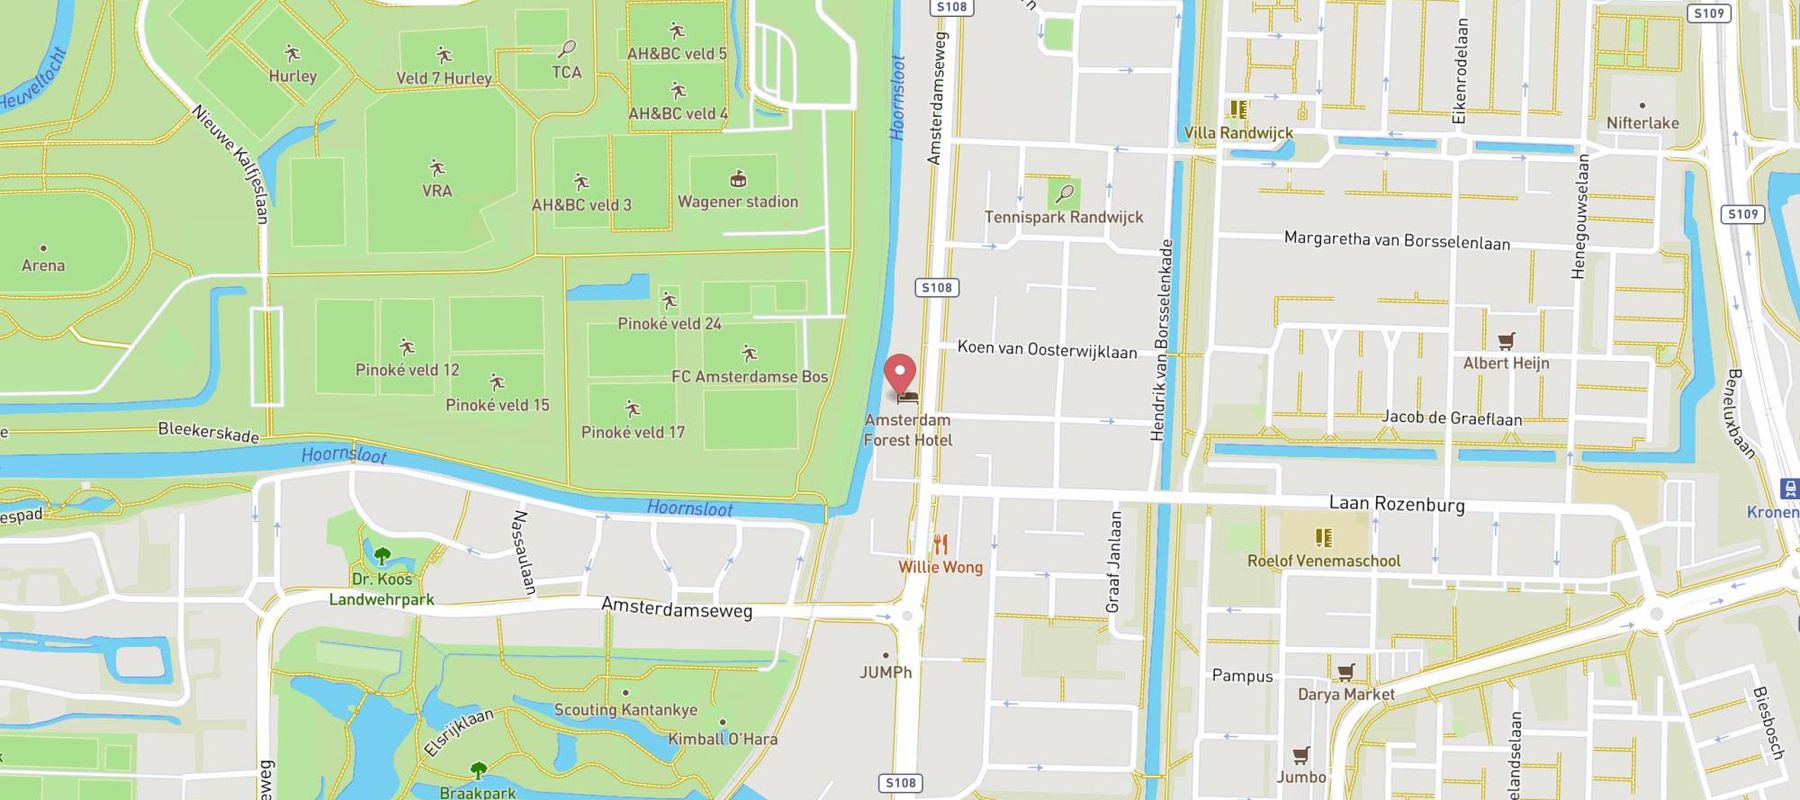 Amsterdam Forest Hotel map